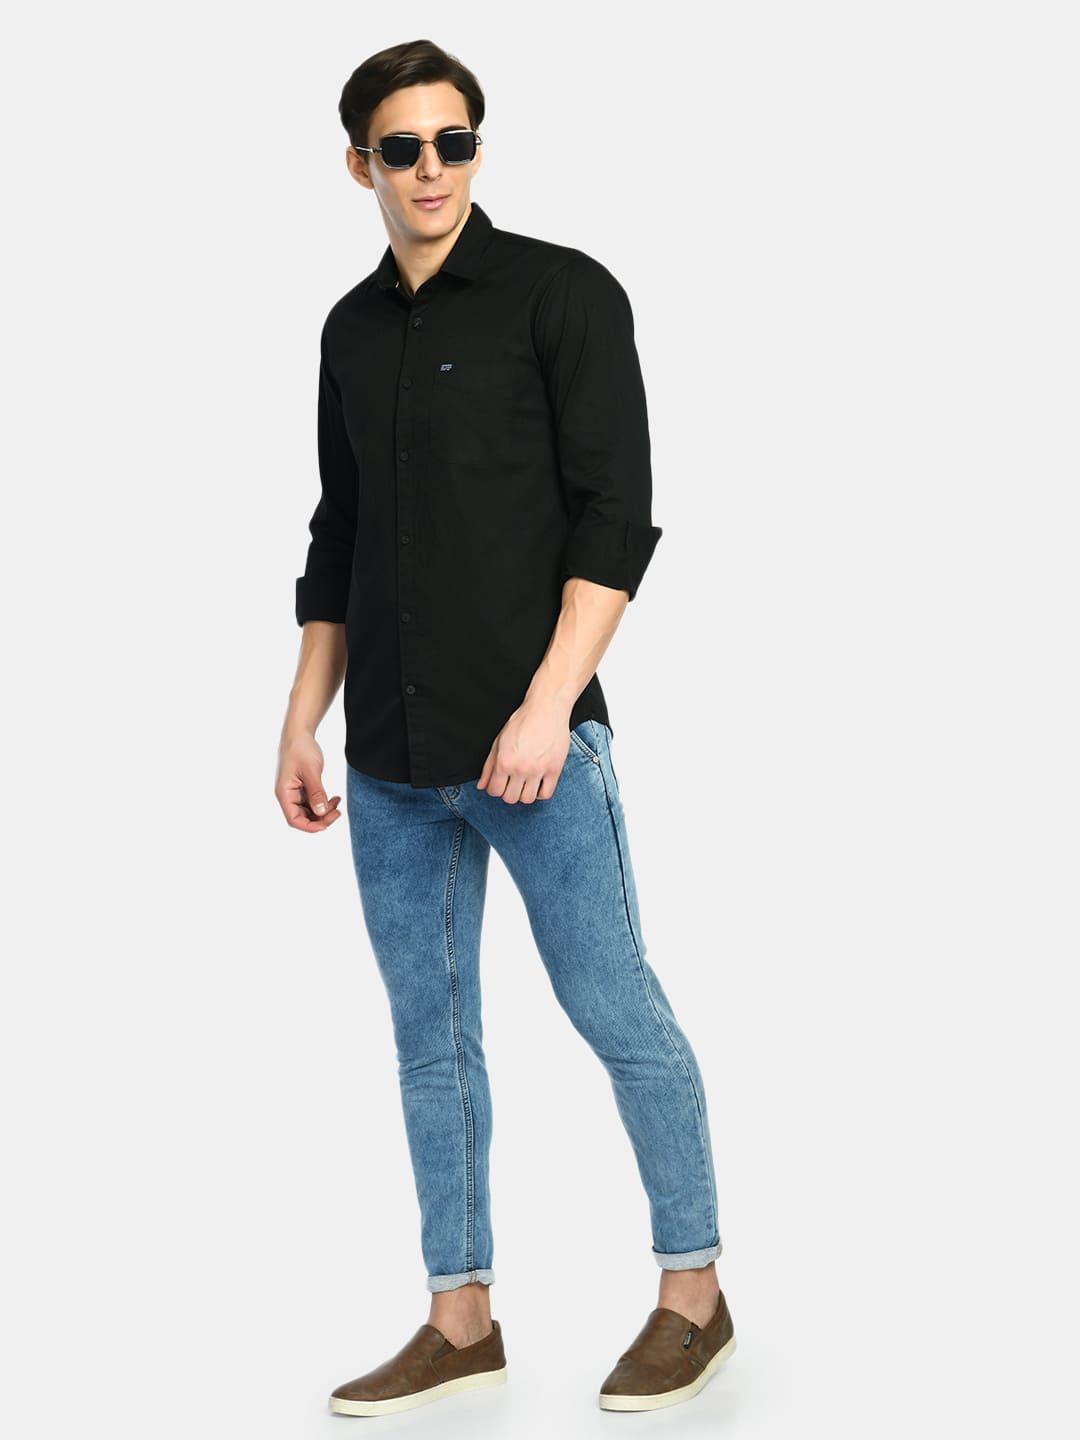 Men's Ink Black Solid Cotton Casual Shirt